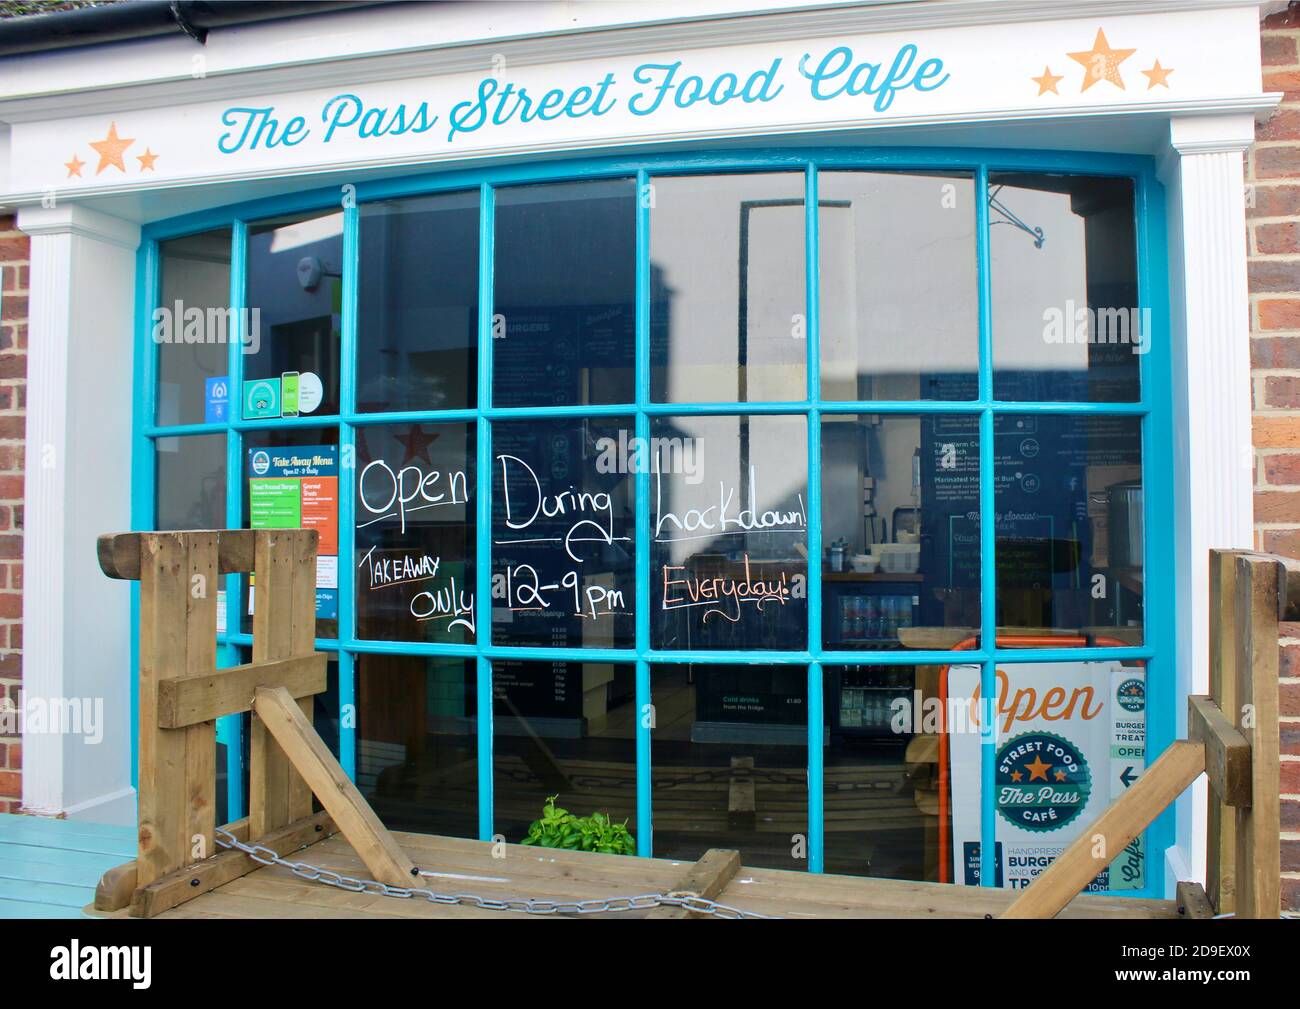 The Pass Street Food Cafe in Chichester, West Sussex, England during lockdown. Business closures due to stay home, stay safe. Stock Photo